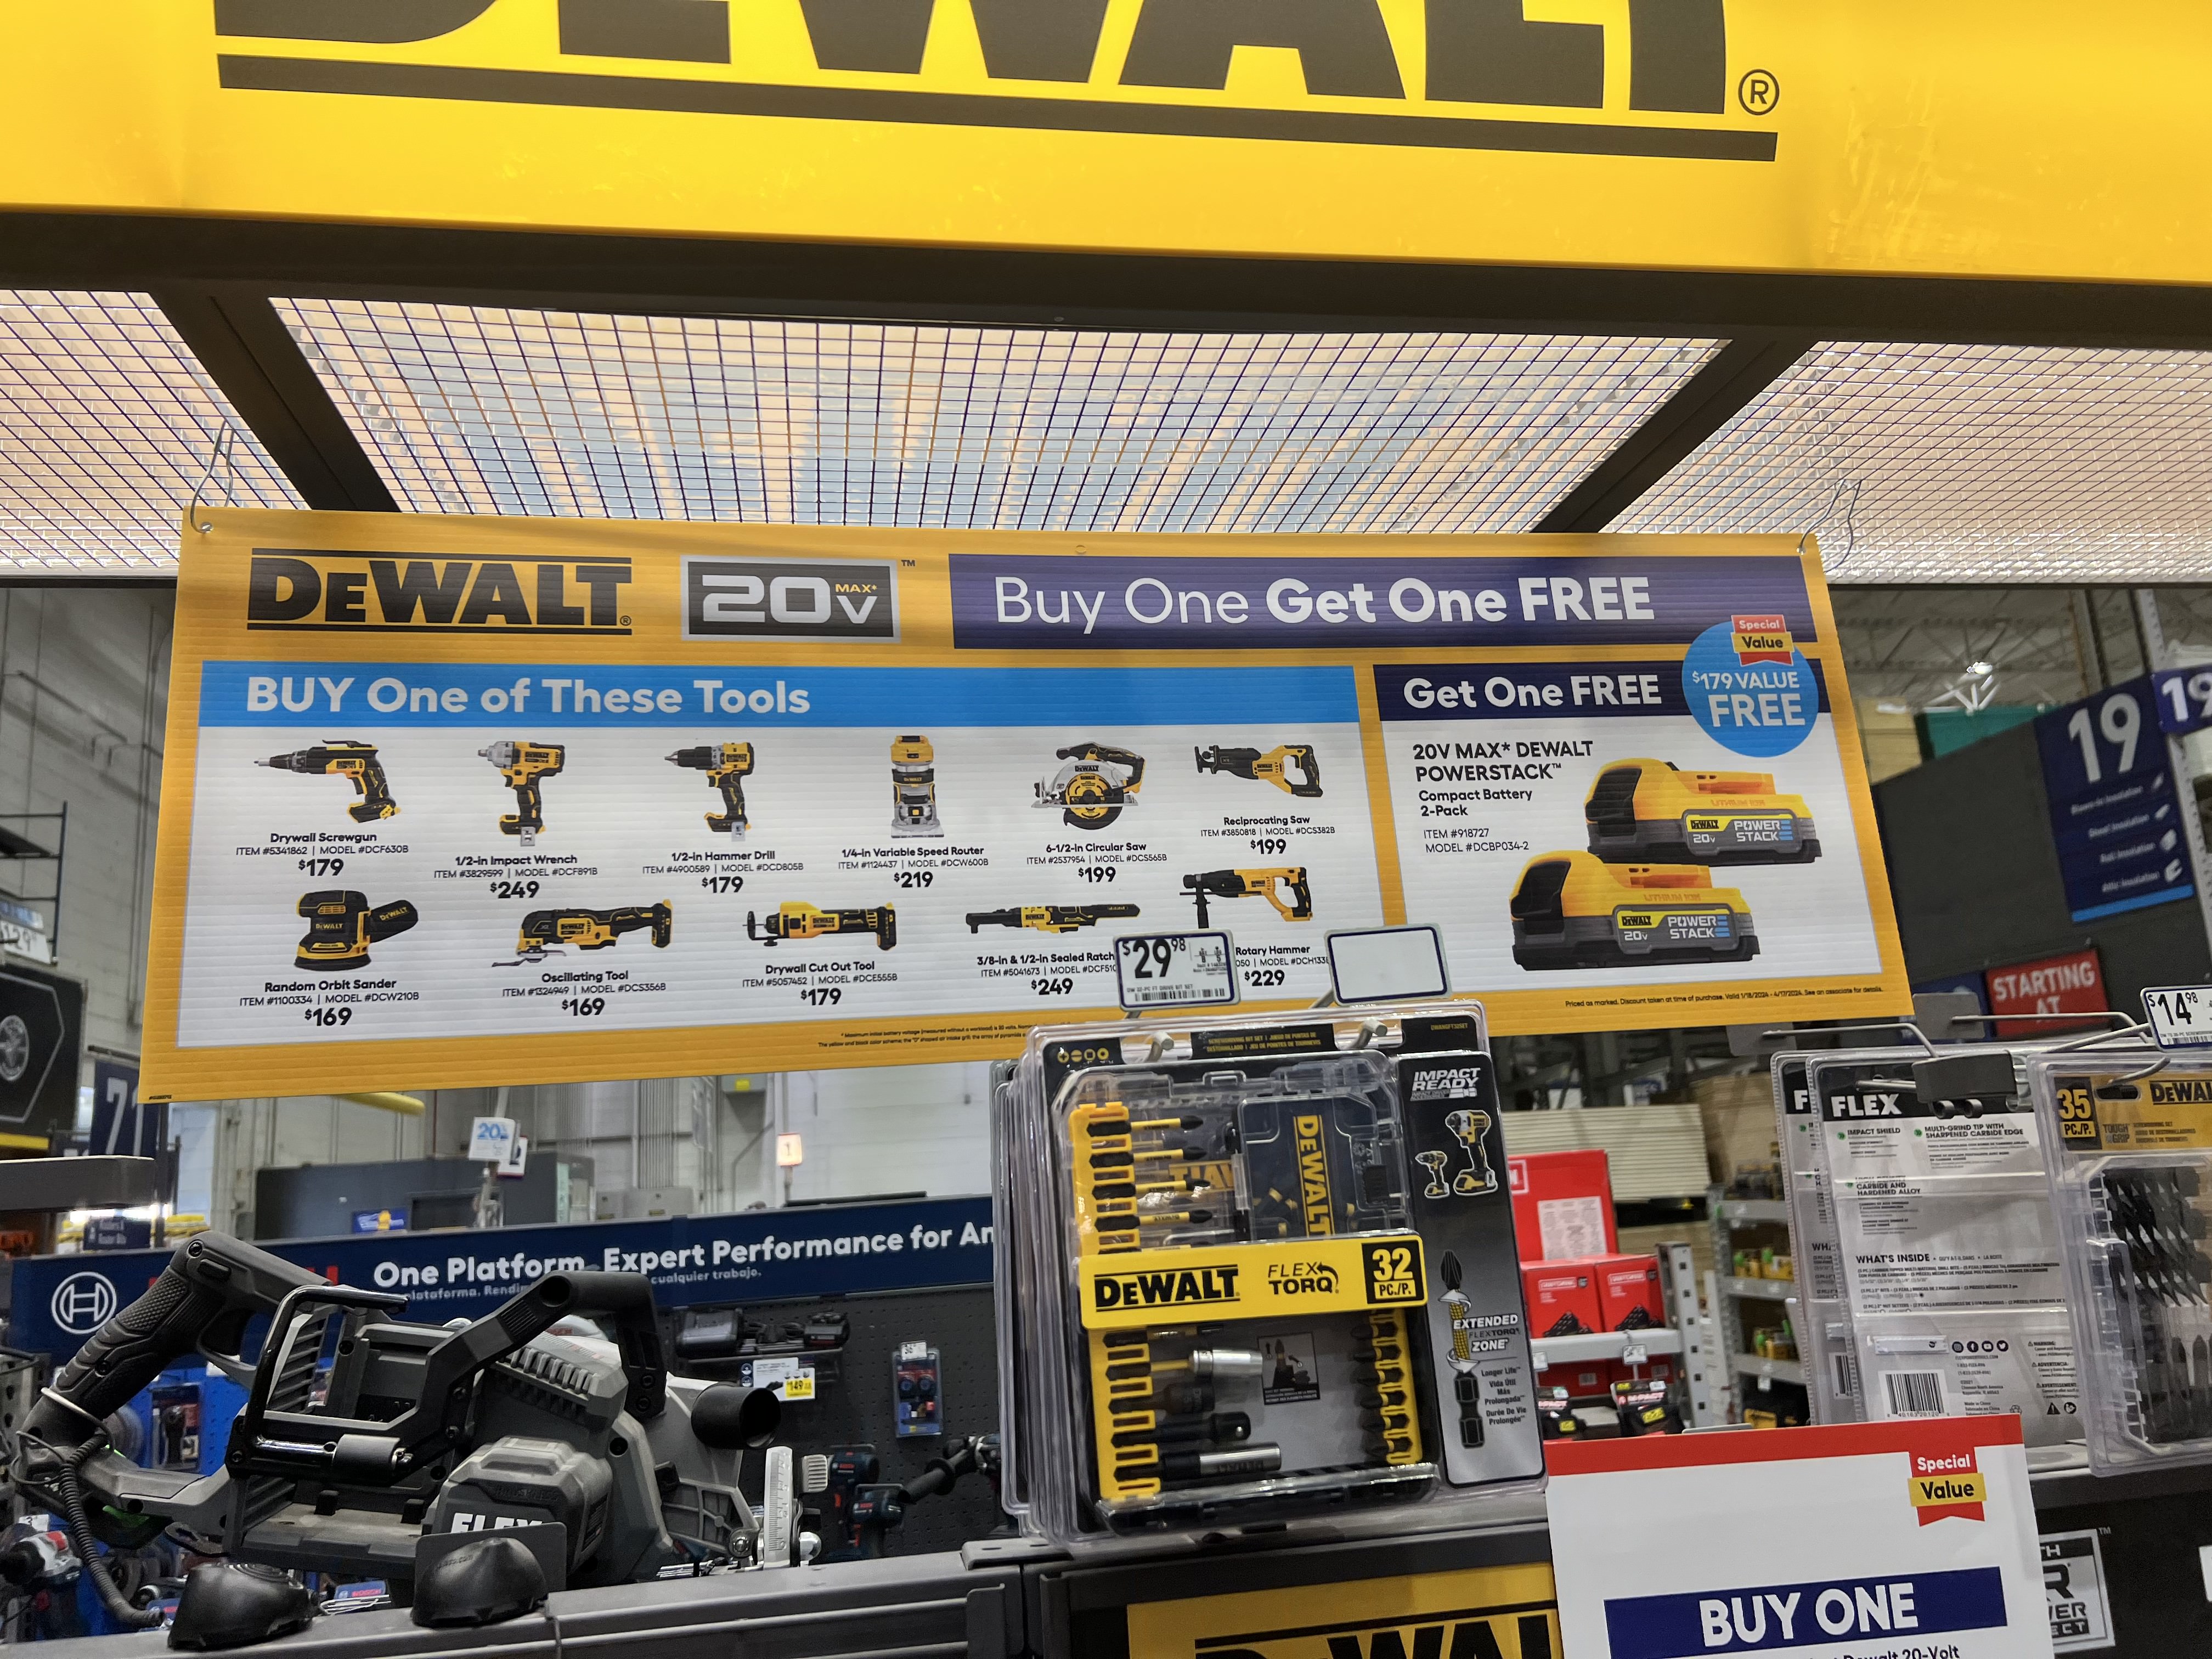 Free DEWALT POWERSTACK 20-V 2-Pack + DEWALT XR 20-volt Max Variable Speed Brushless 1/2-in Drive Cordless Impact Wrench (Bare Tool) in Yellow | DCF891B $249